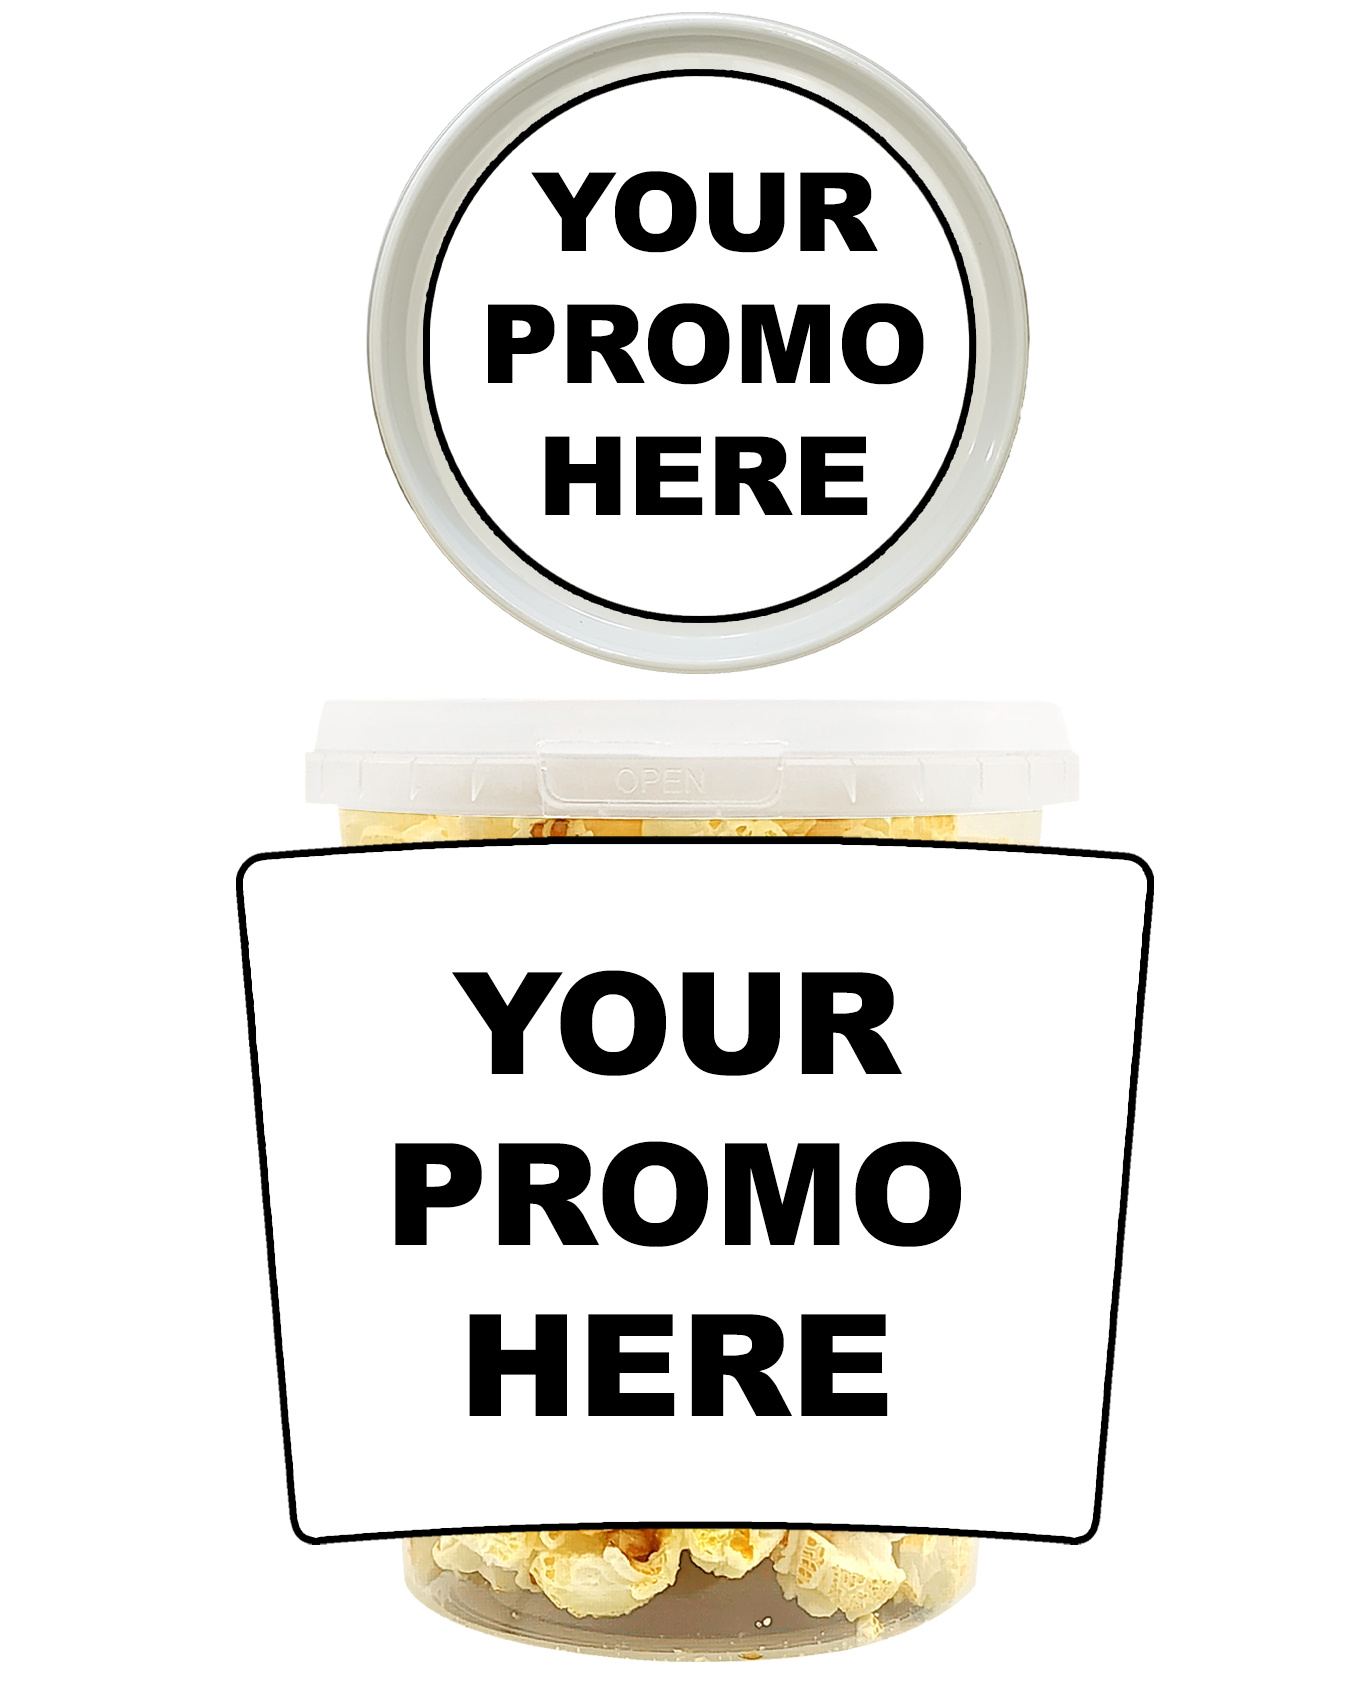 Promo Pop™ - Simply Salted Classic (as low as $3.49 per bucket) Case of 12 Price